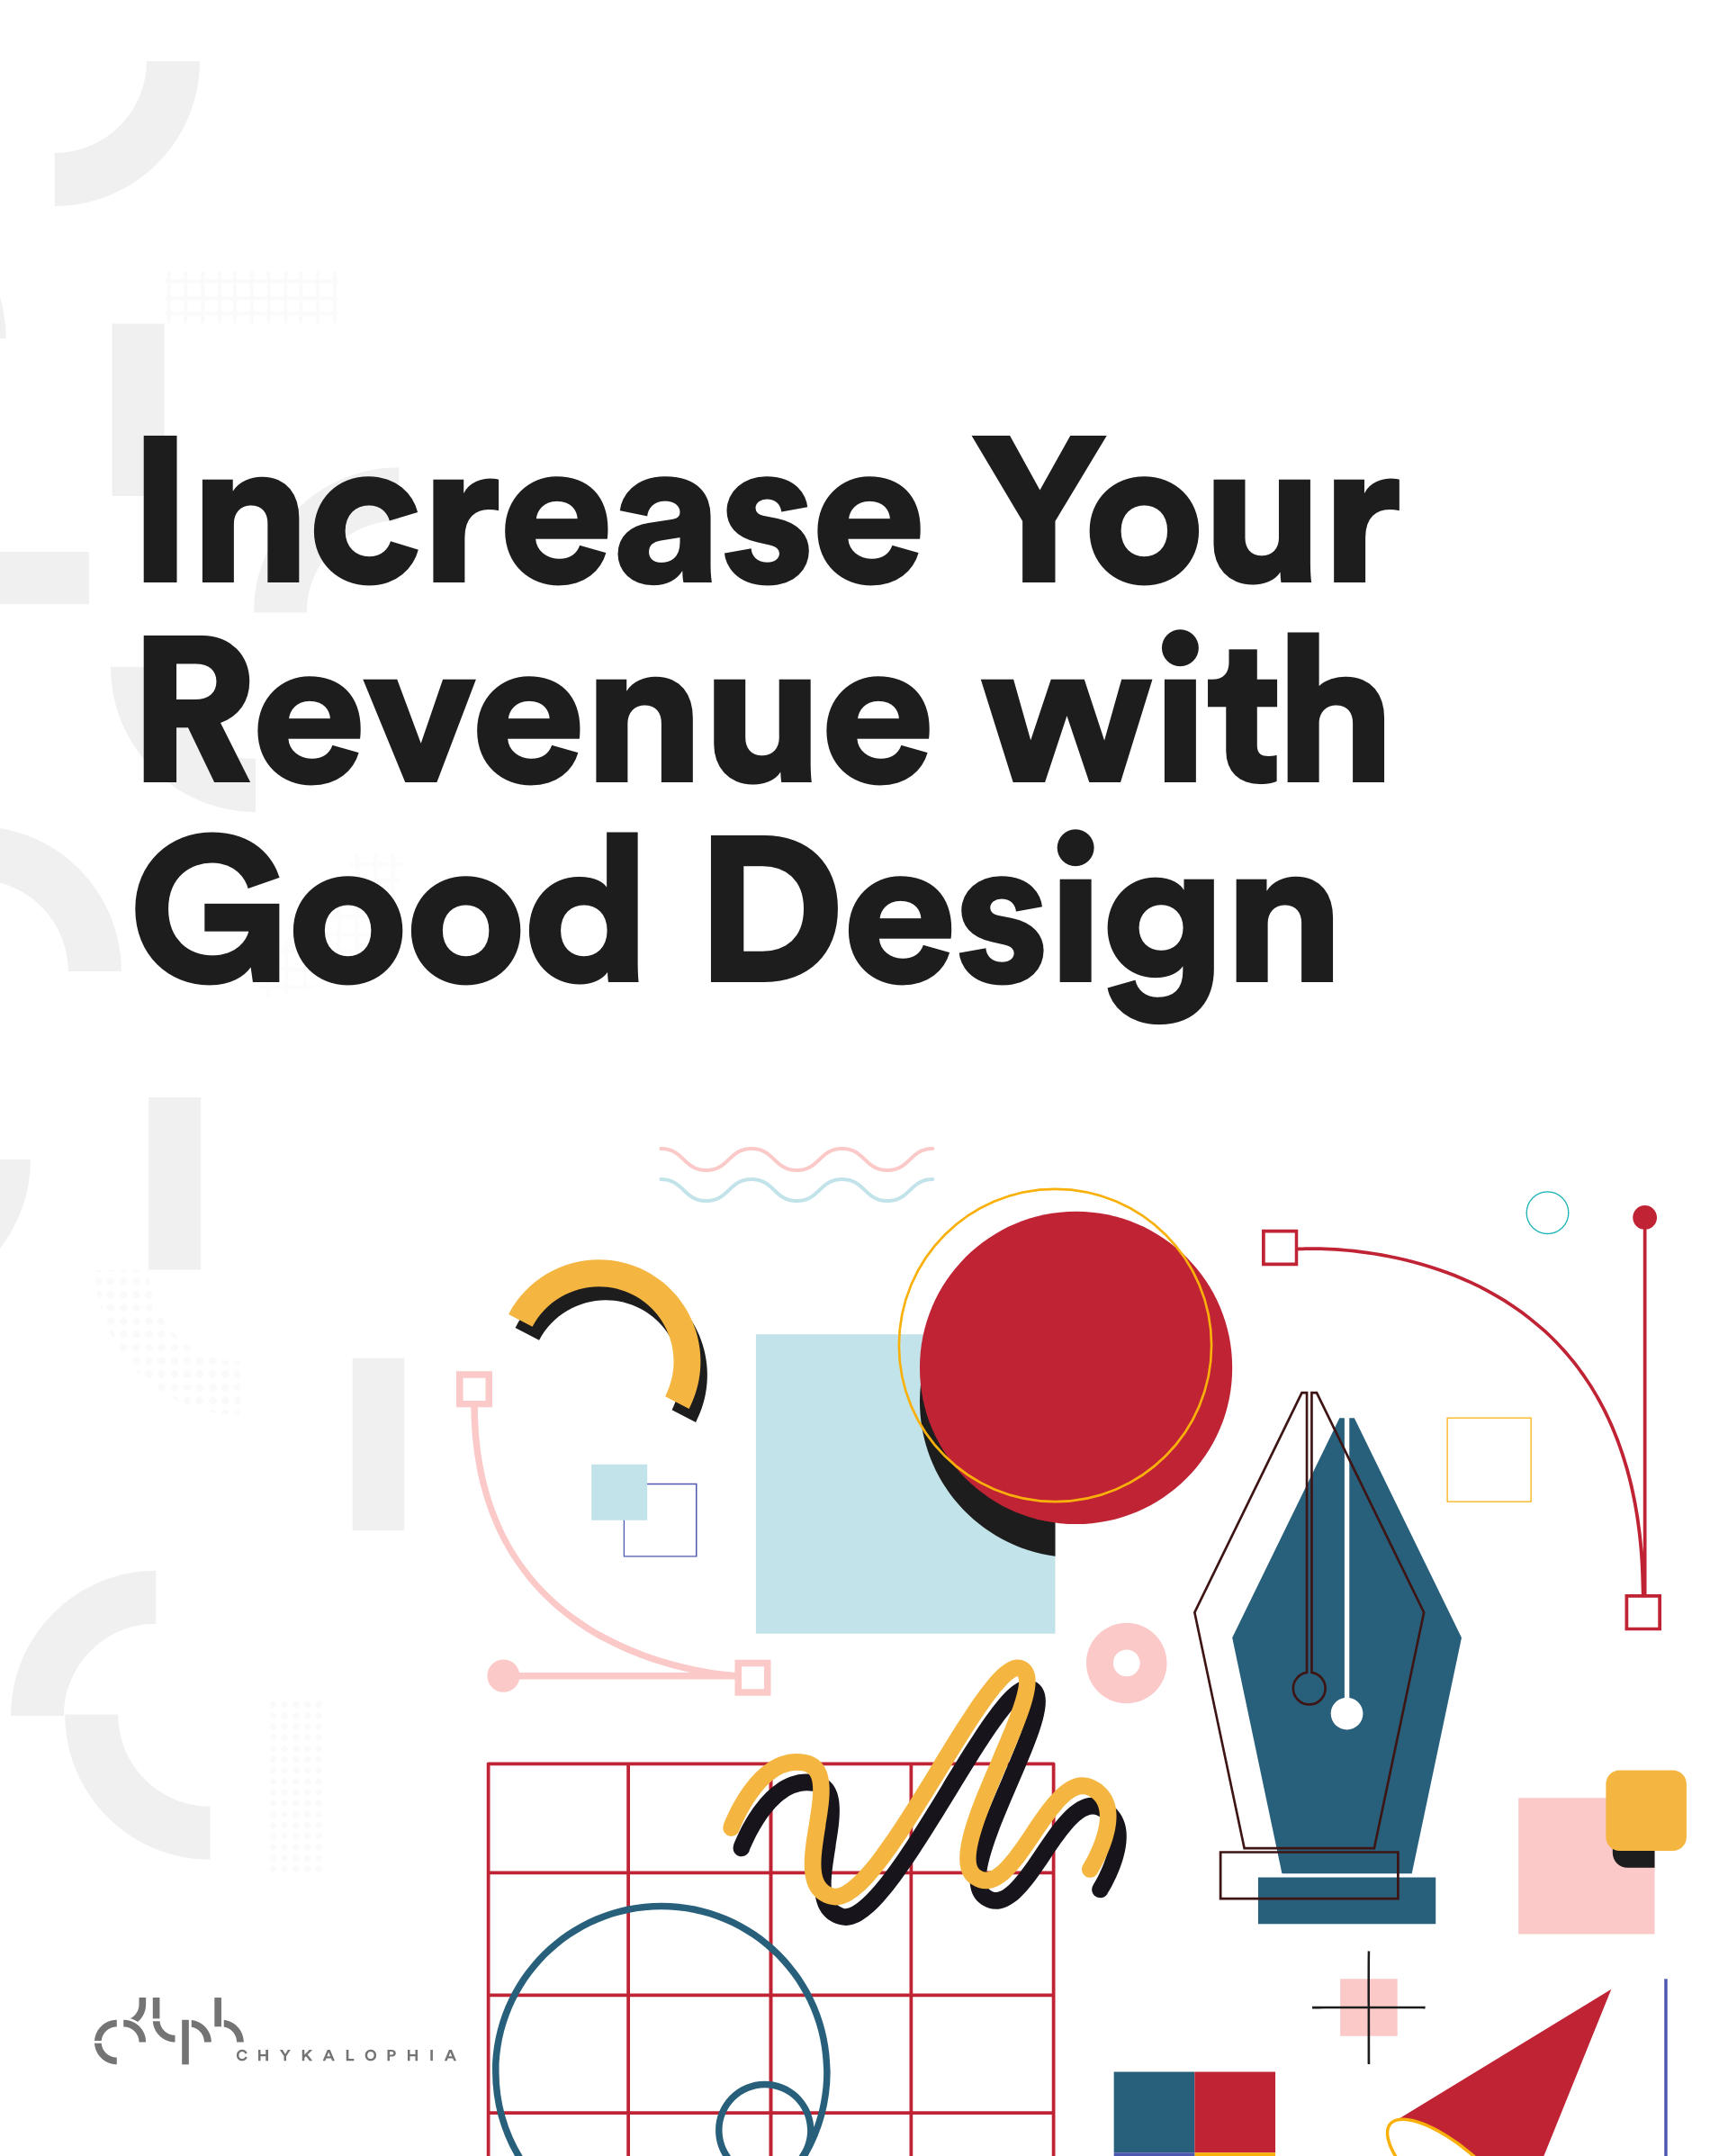 How can you increase revenue with good design? Design benefits business as it helps make processes more efficient, lower costs, and attract customers.